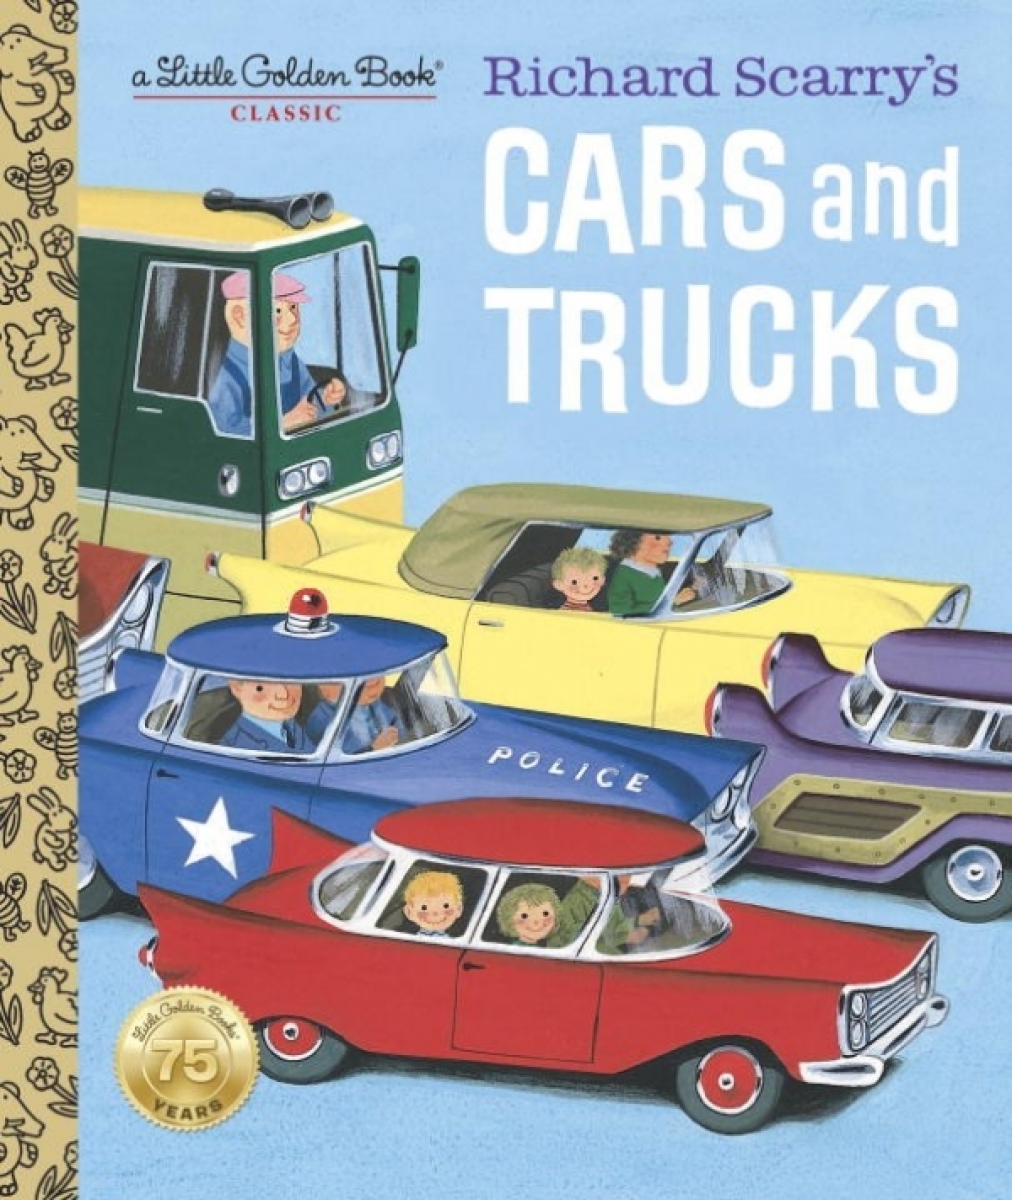 Scarry Richard LGB Richard Scarry's Cars and Trucks 